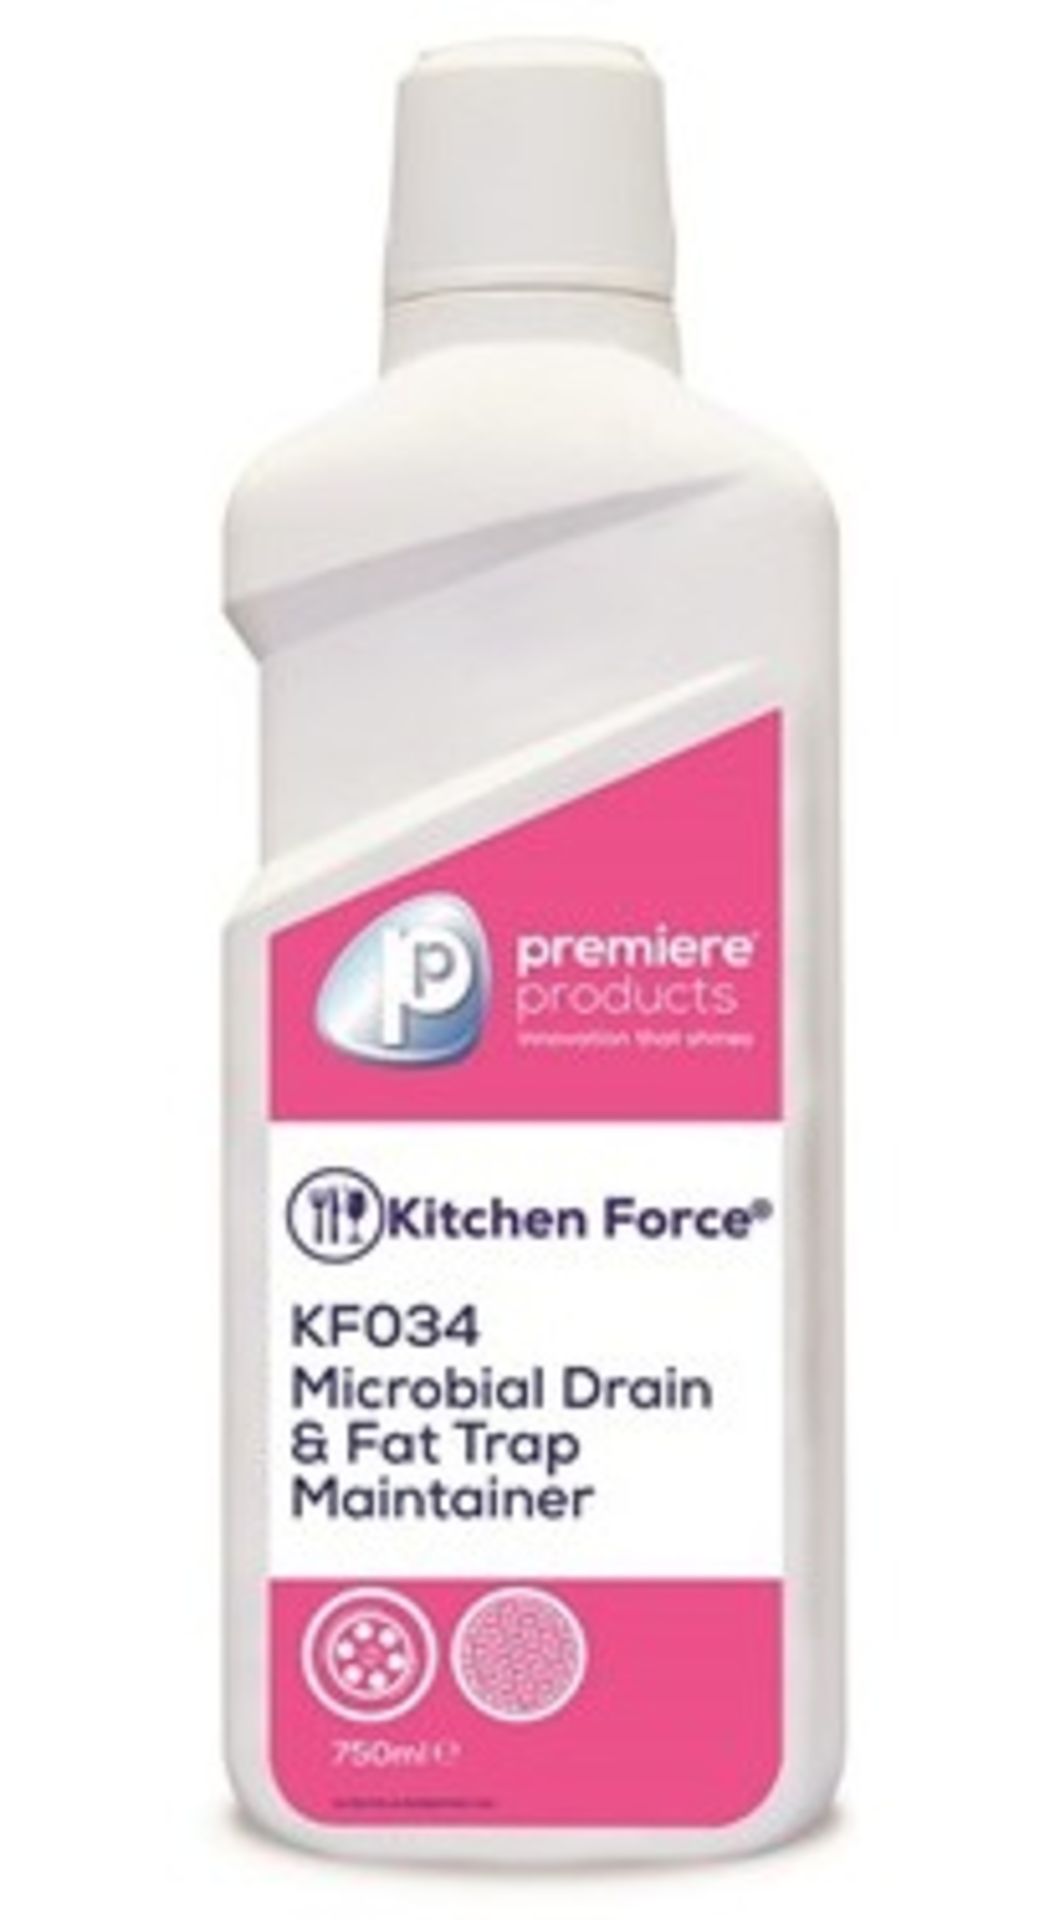 12 x Kitchen Force 750ml Microbial Drain & Fat Trap Maintainer - Premiere Products - Includes 12 x